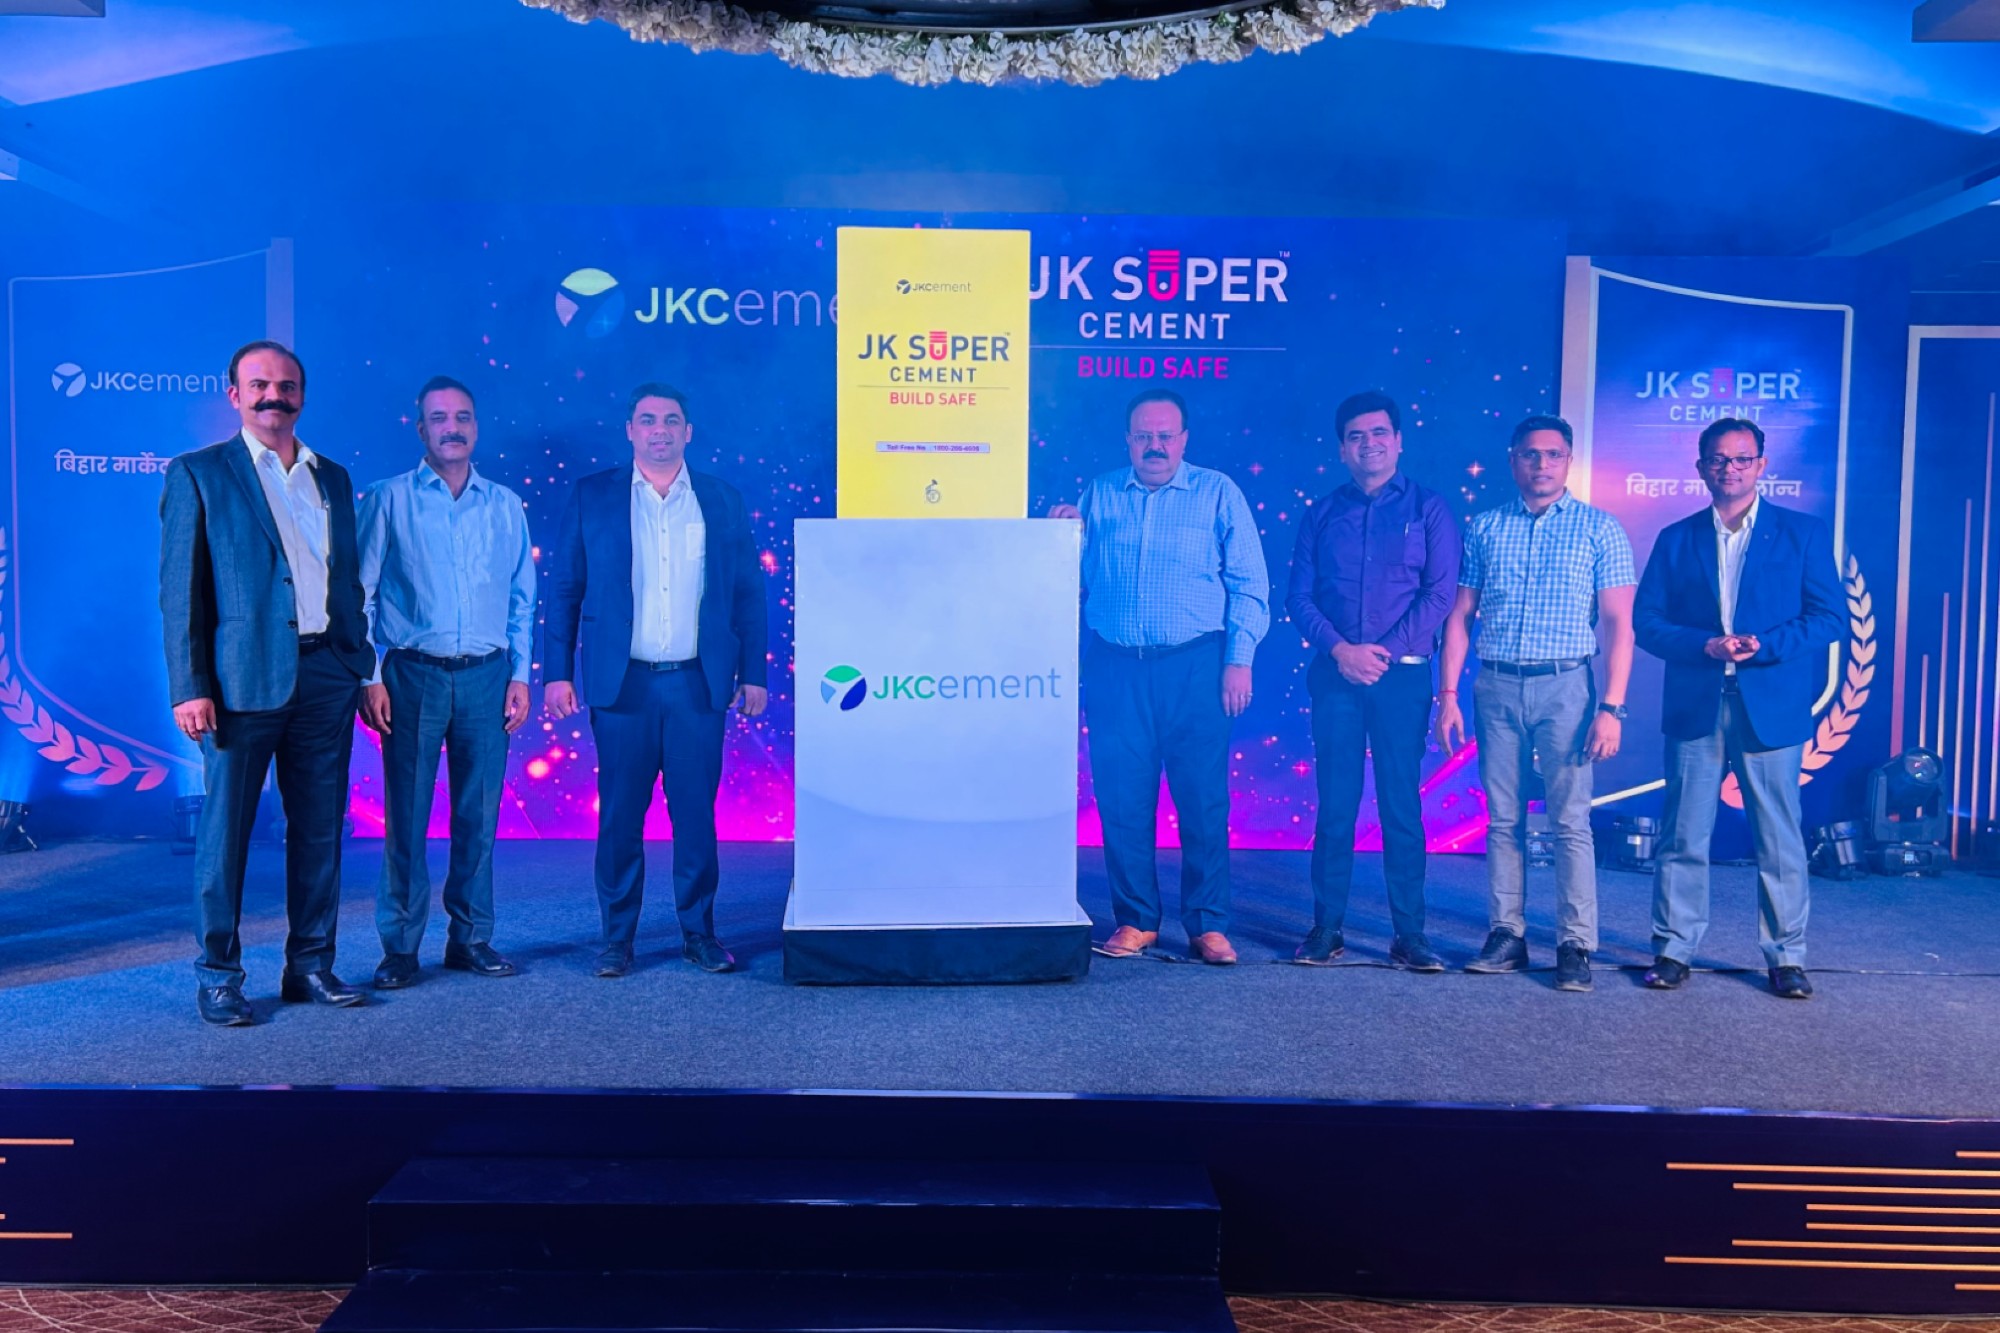 JK Cement, one of India’s leading manufacturers of Grey Cement and one of the leading White Cement manufacturers in the World, today announced its expansion into the East Indian market with the official launch of its Grey Cement business in Bihar.